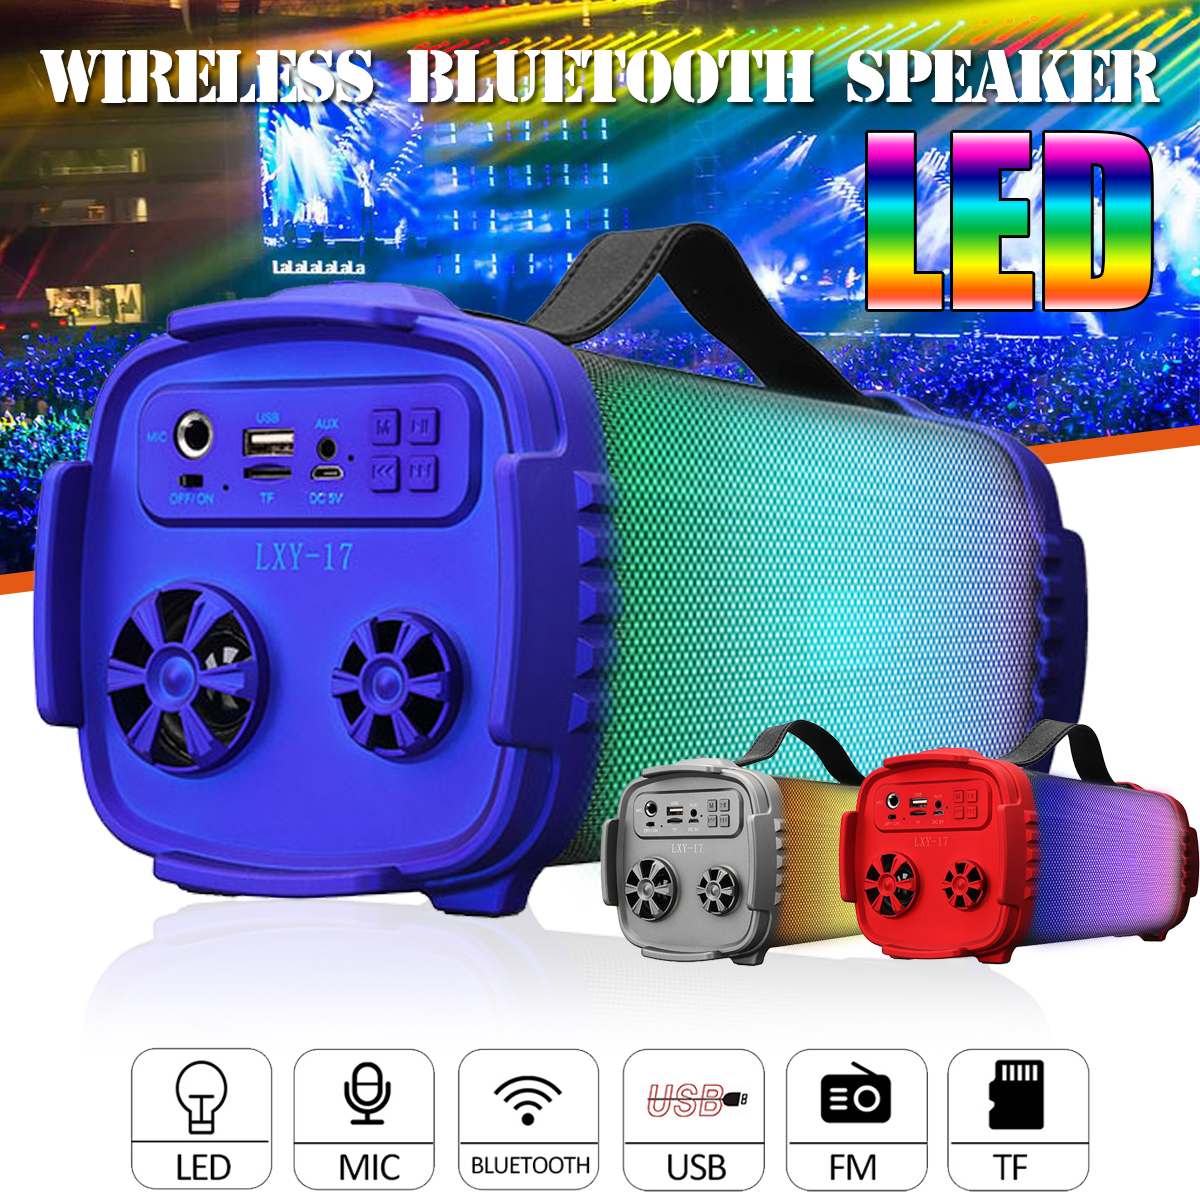 Portable-Wireless-bluetooth-Speaker-Colorful-LED-Light-Outdoor-Stereo-Bass-FM-Radio-TF-Card-Speaker-1388743-2